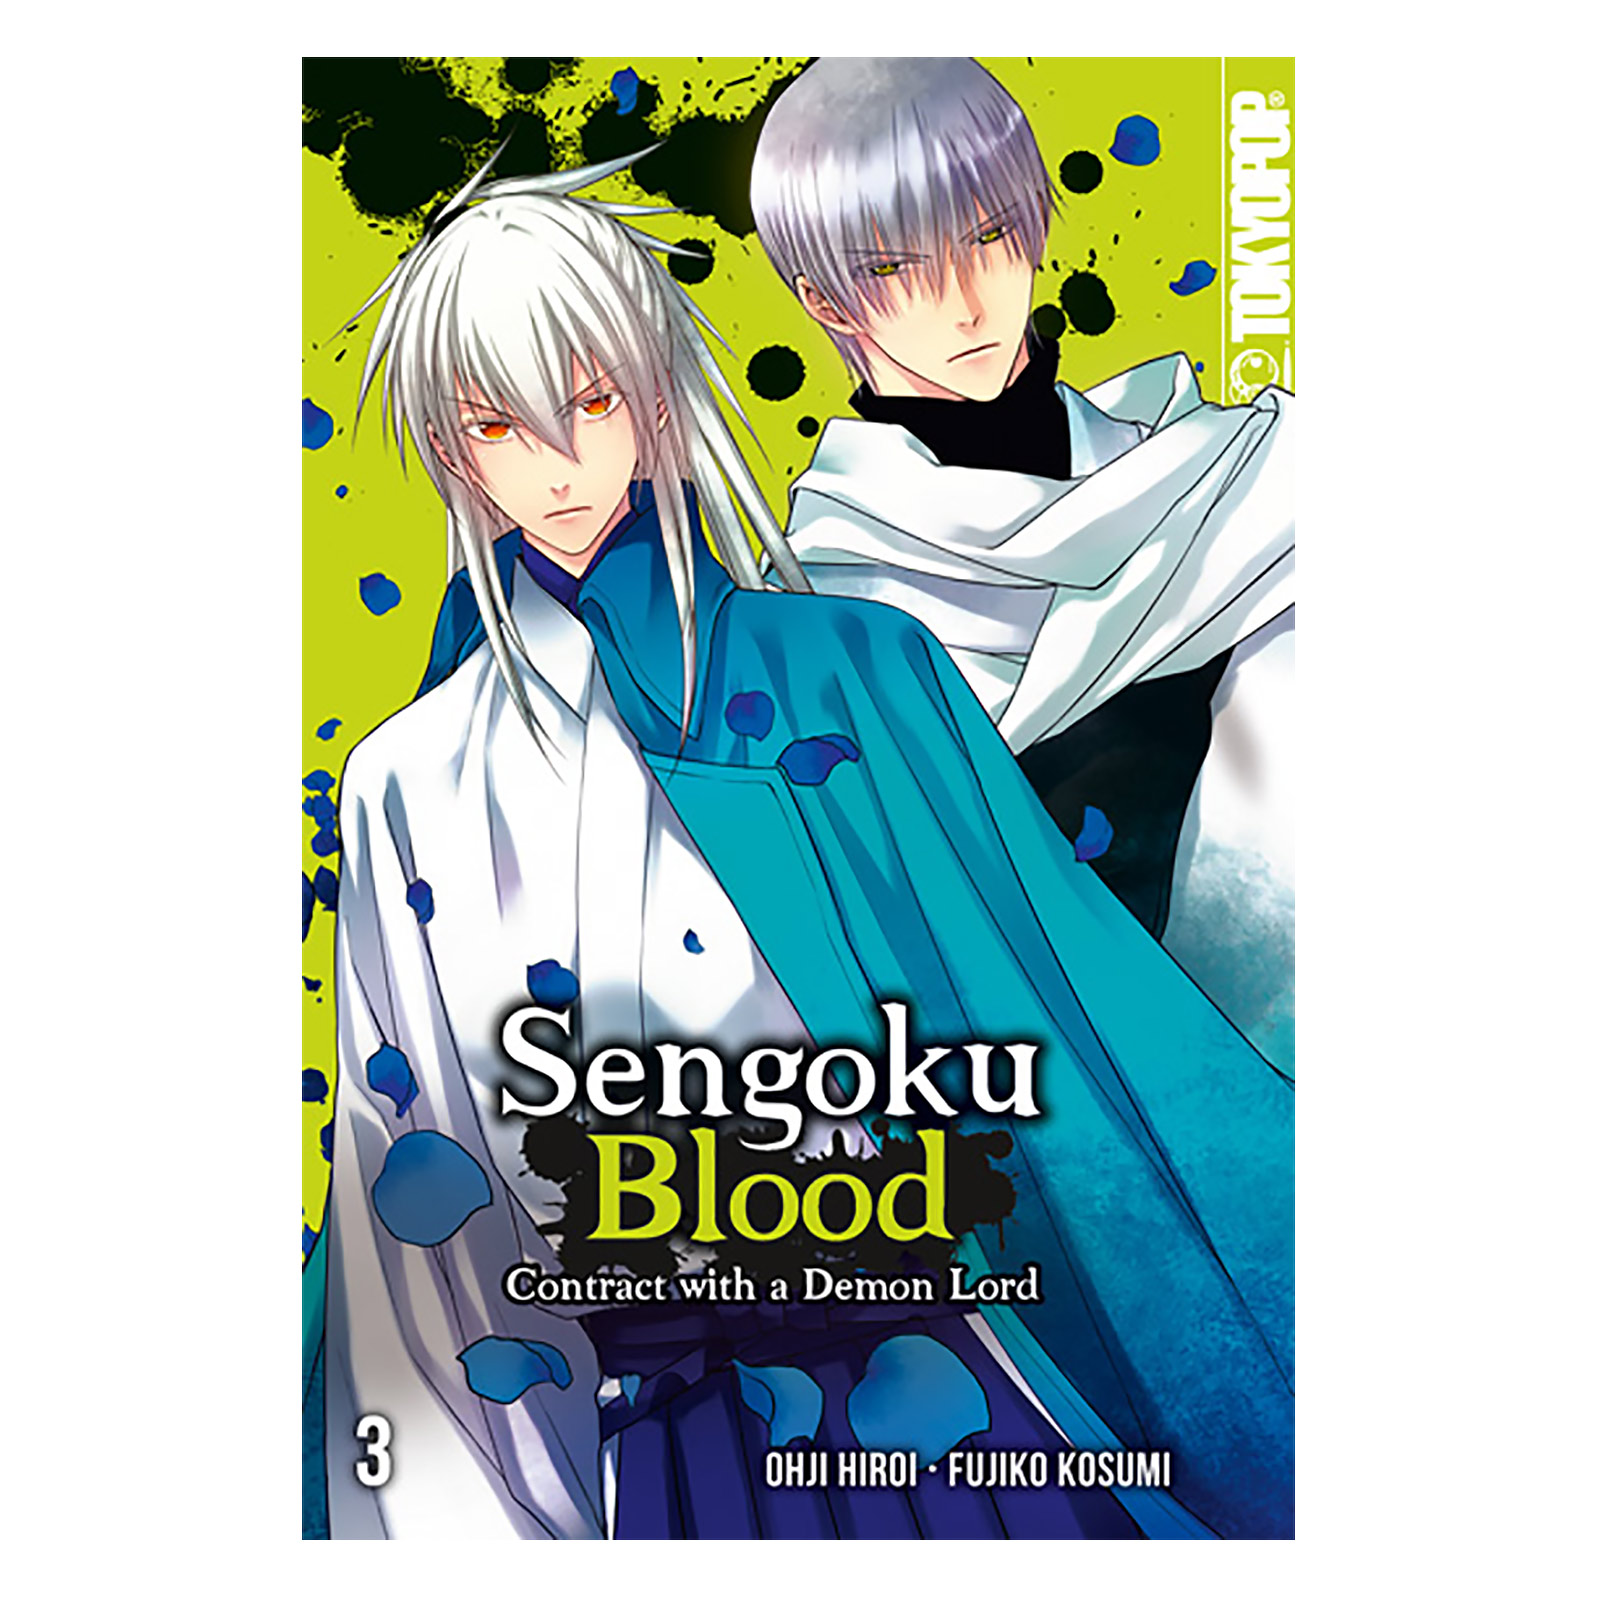 Sengoku Blood - Contract with a Demon Lord Volume 3 Paperback